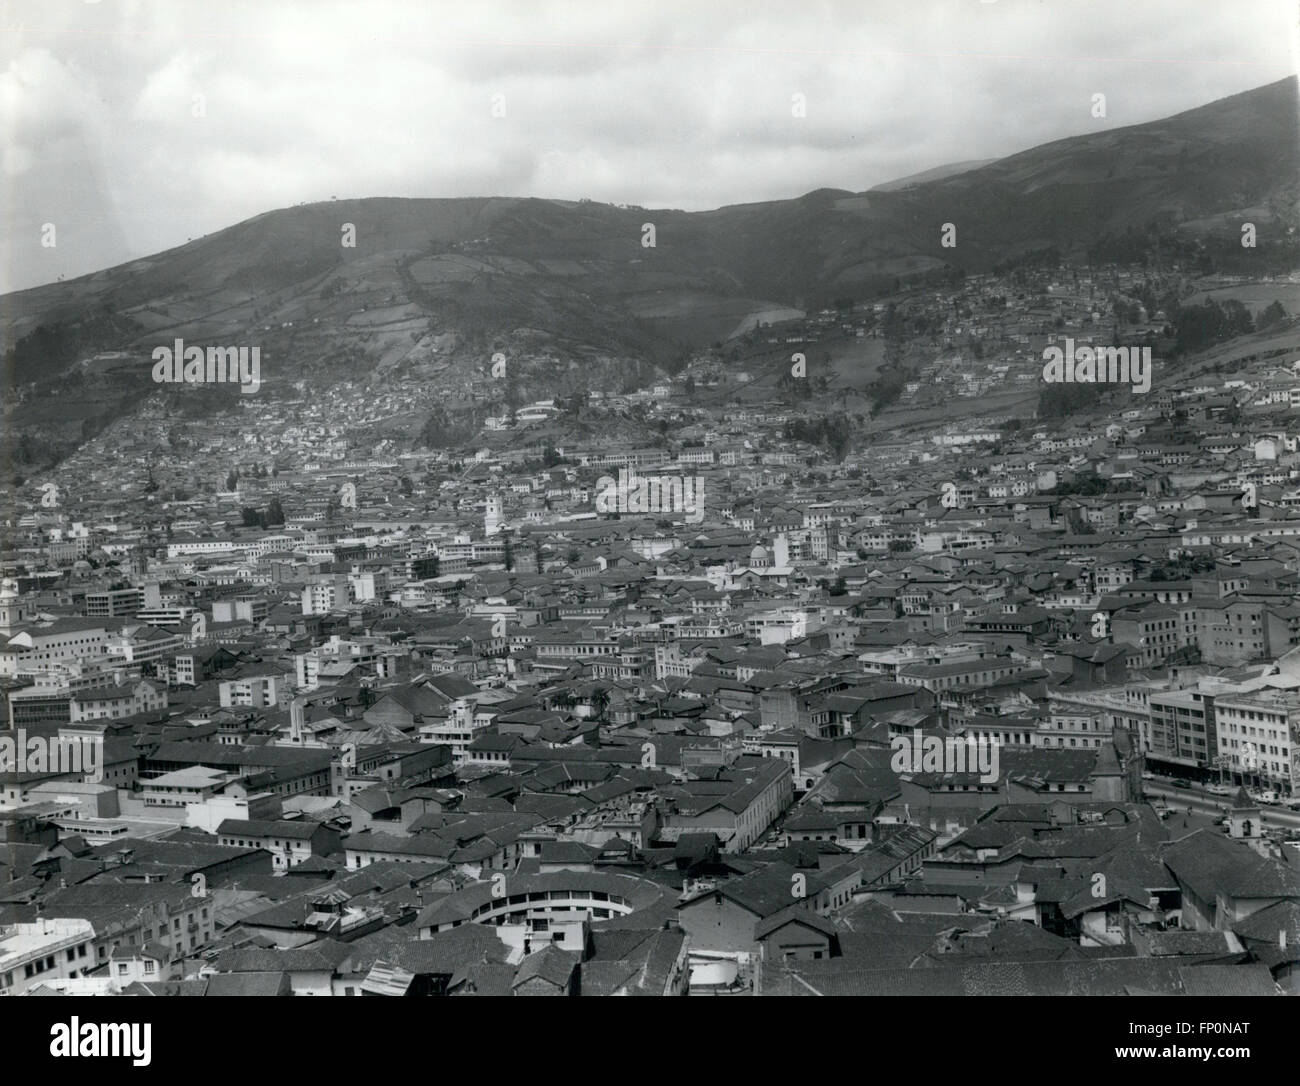 1962 - Ecuador - Quito : Quito is seen from Ichimbia Killy. We may appreciated the antique city with narrow streets, old housed and sometimes with big constructions. © Keystone Pictures USA/ZUMAPRESS.com/Alamy Live News Stock Photo